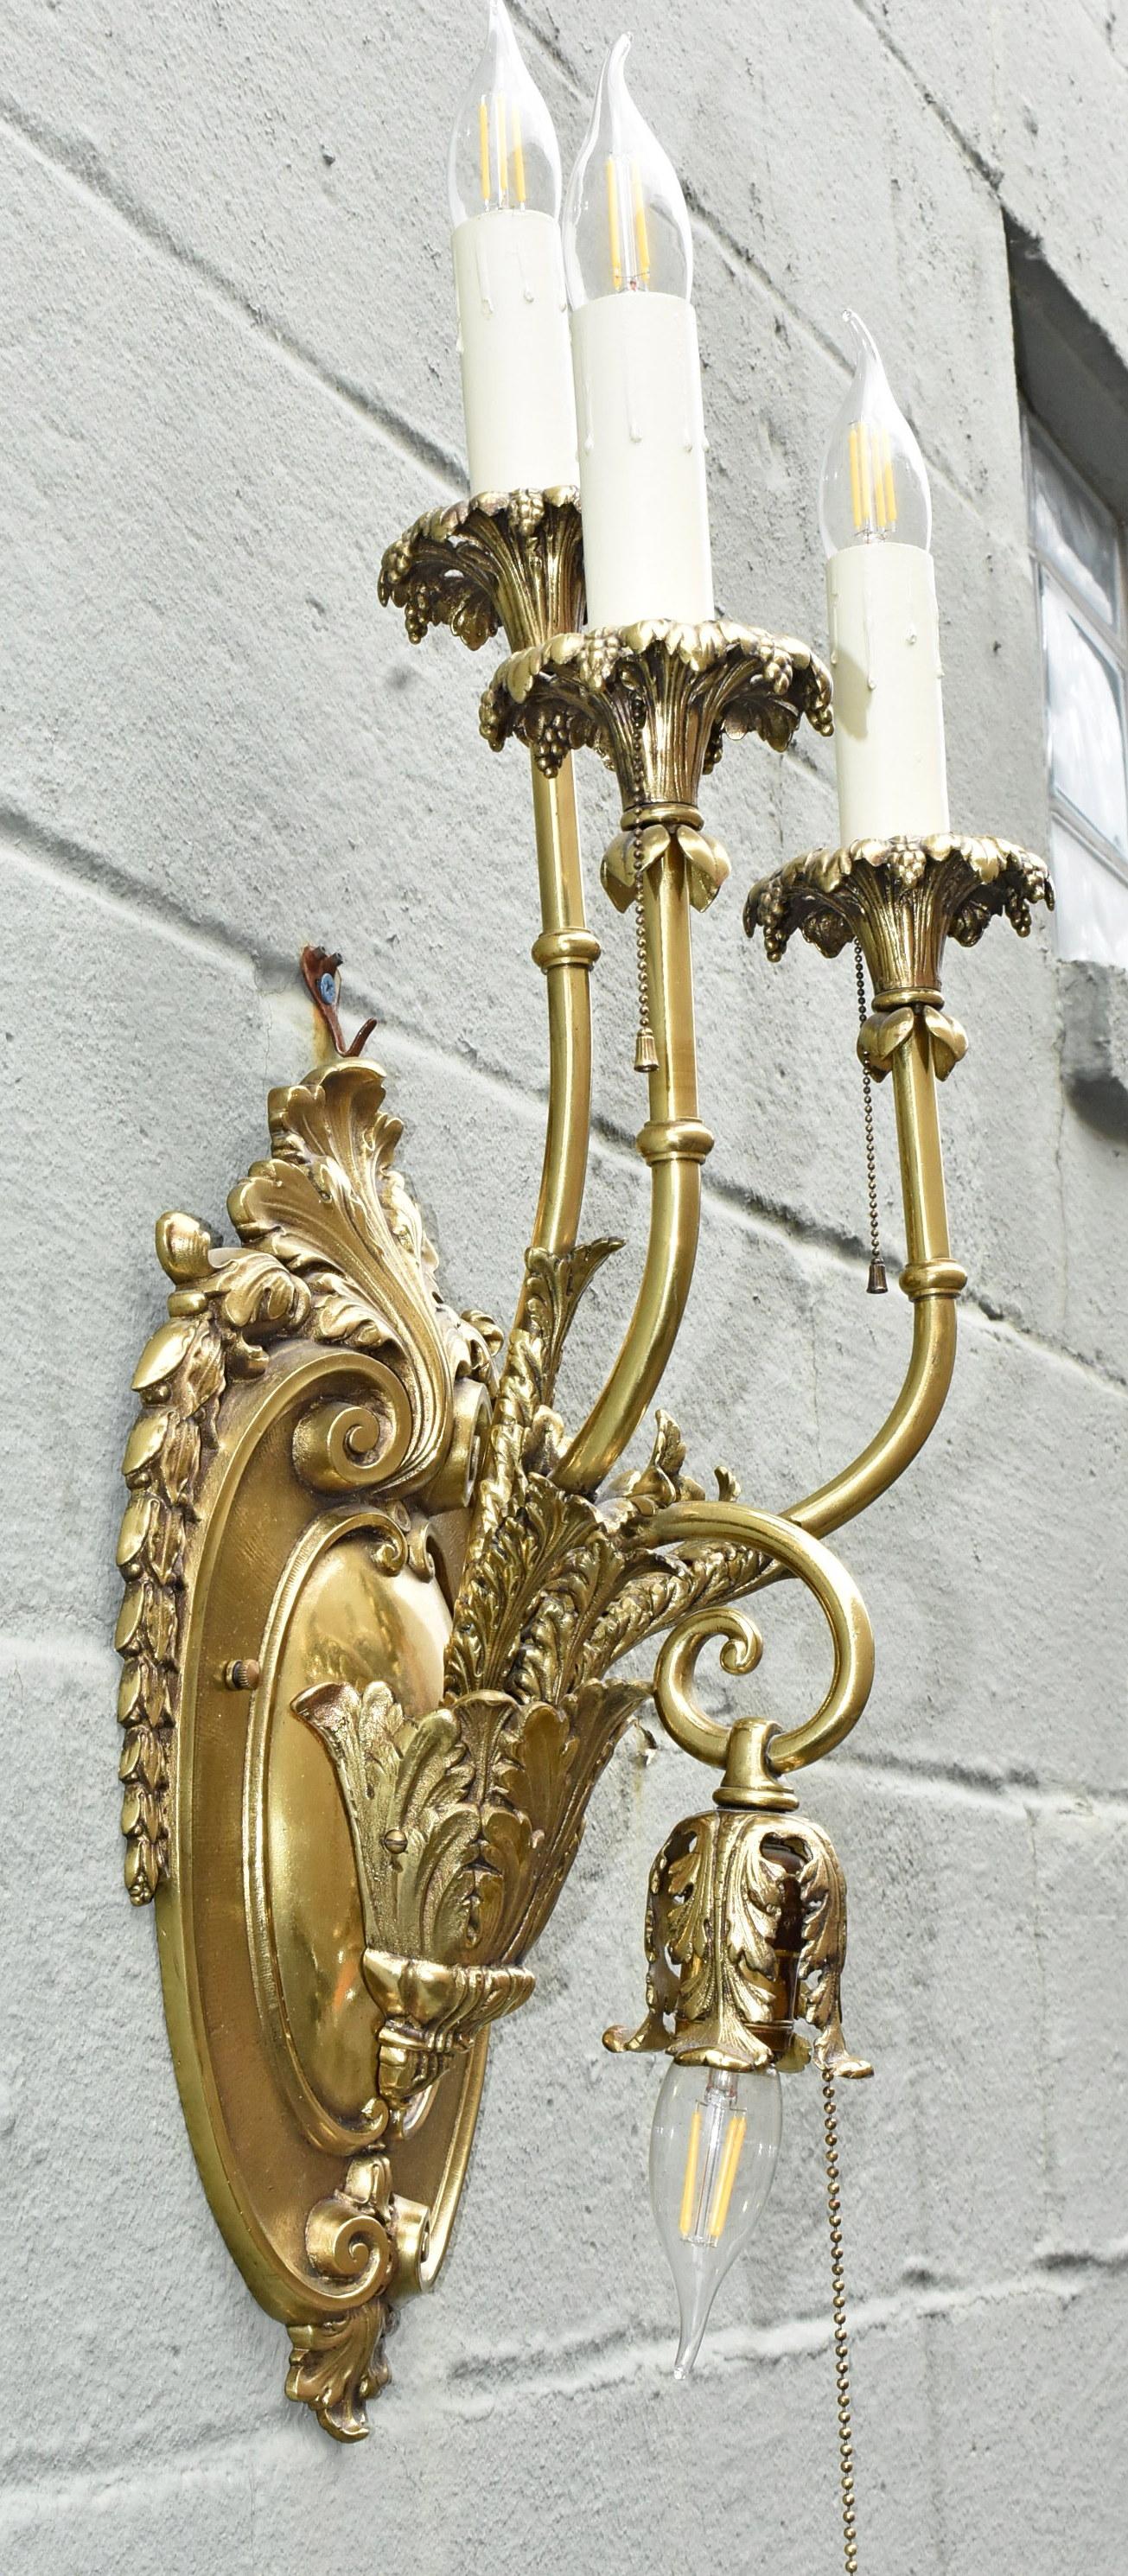 Pair of Oversized Brass French Sconces with Four Arms. Circa Early 20th Century. Detailed brass sconces with three arms up and one arm down each with a pull chain. Rewired and in excellent condition consistent with usage and age. Large back plates